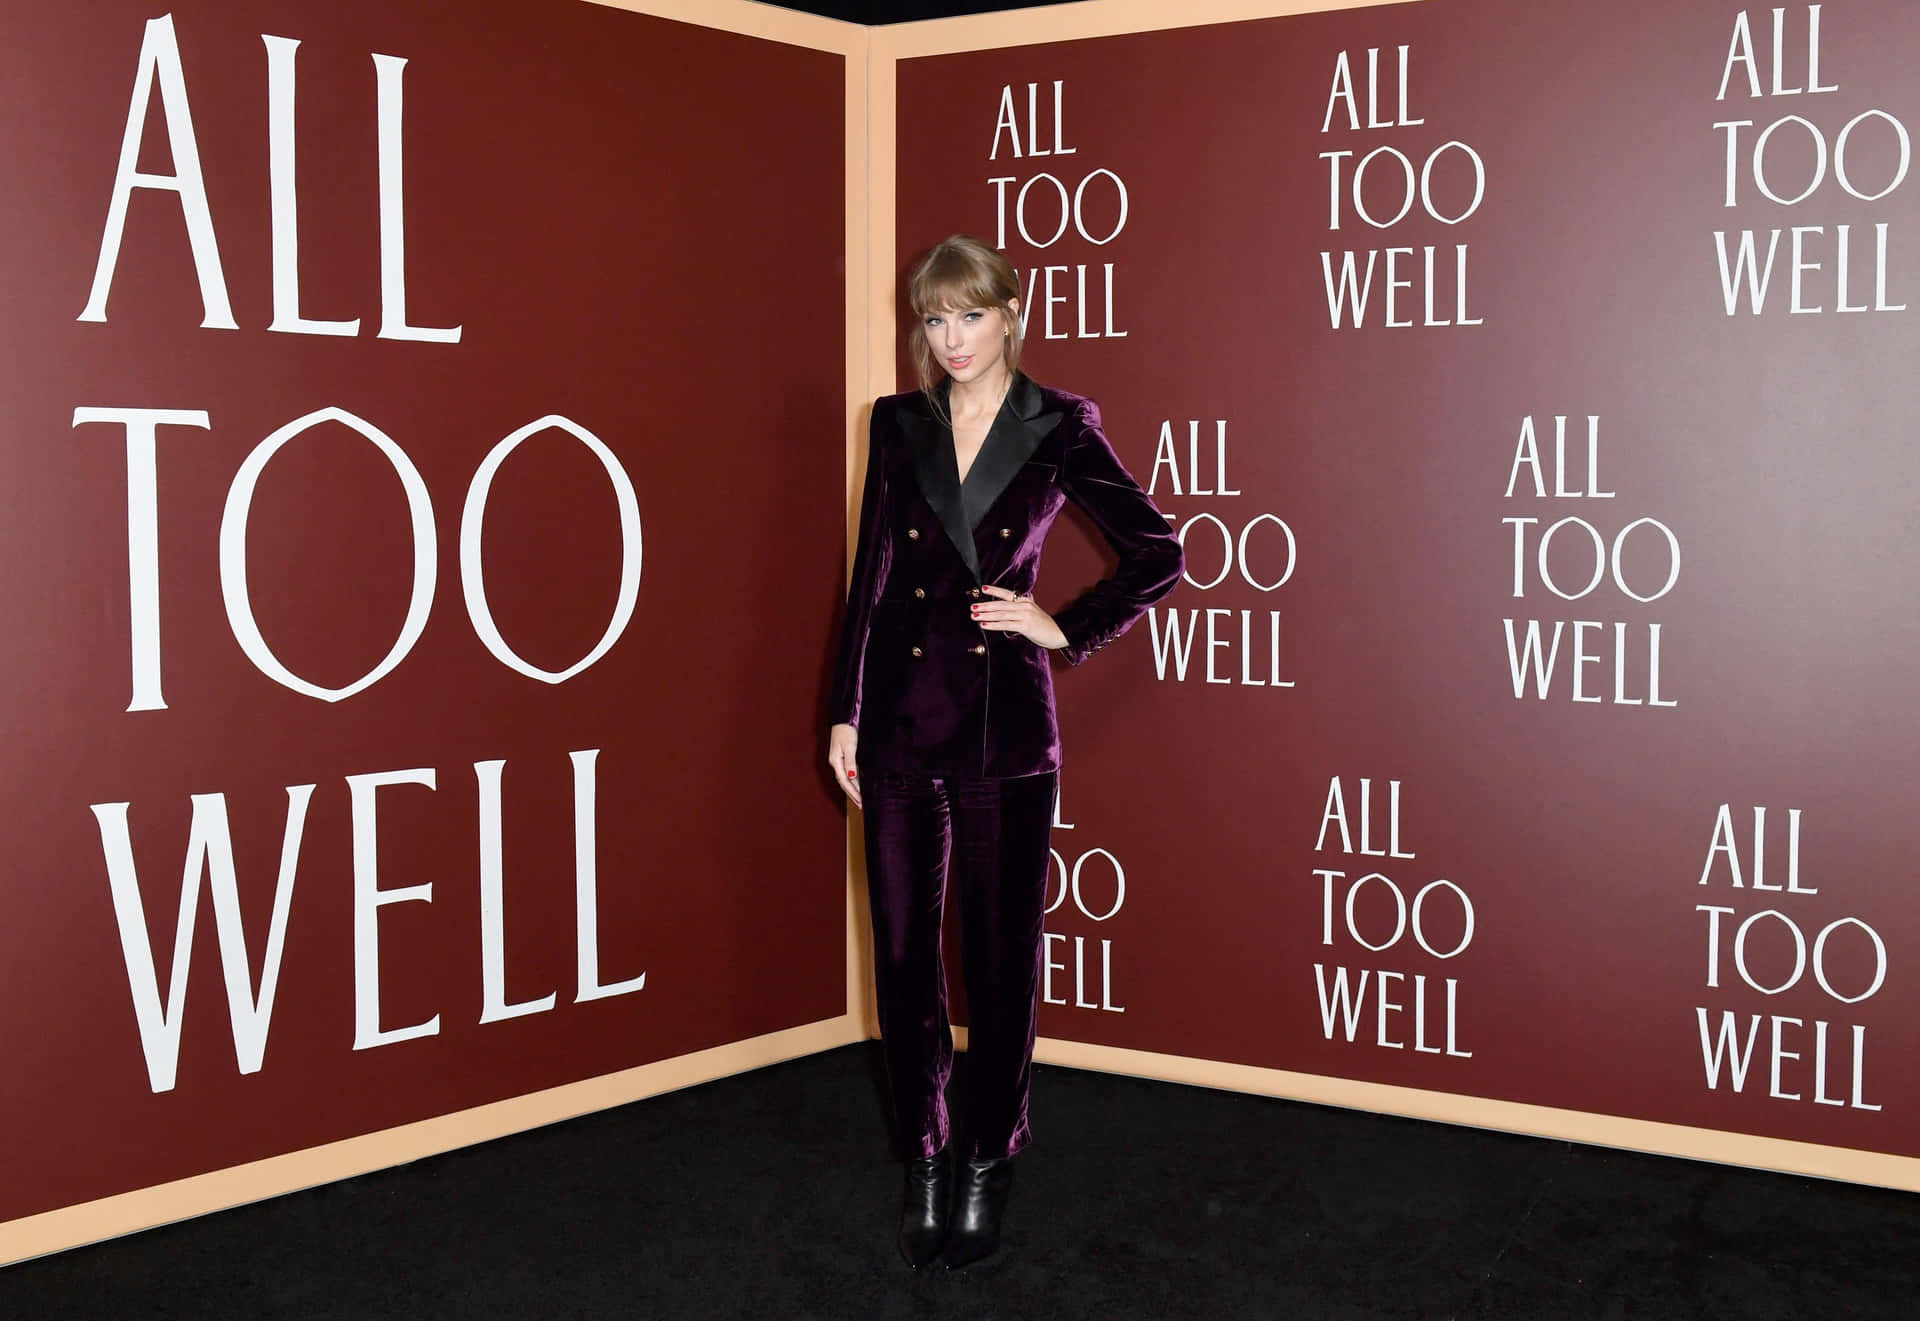 Taylor Swift Red All Too Well Backdrop Wallpaper